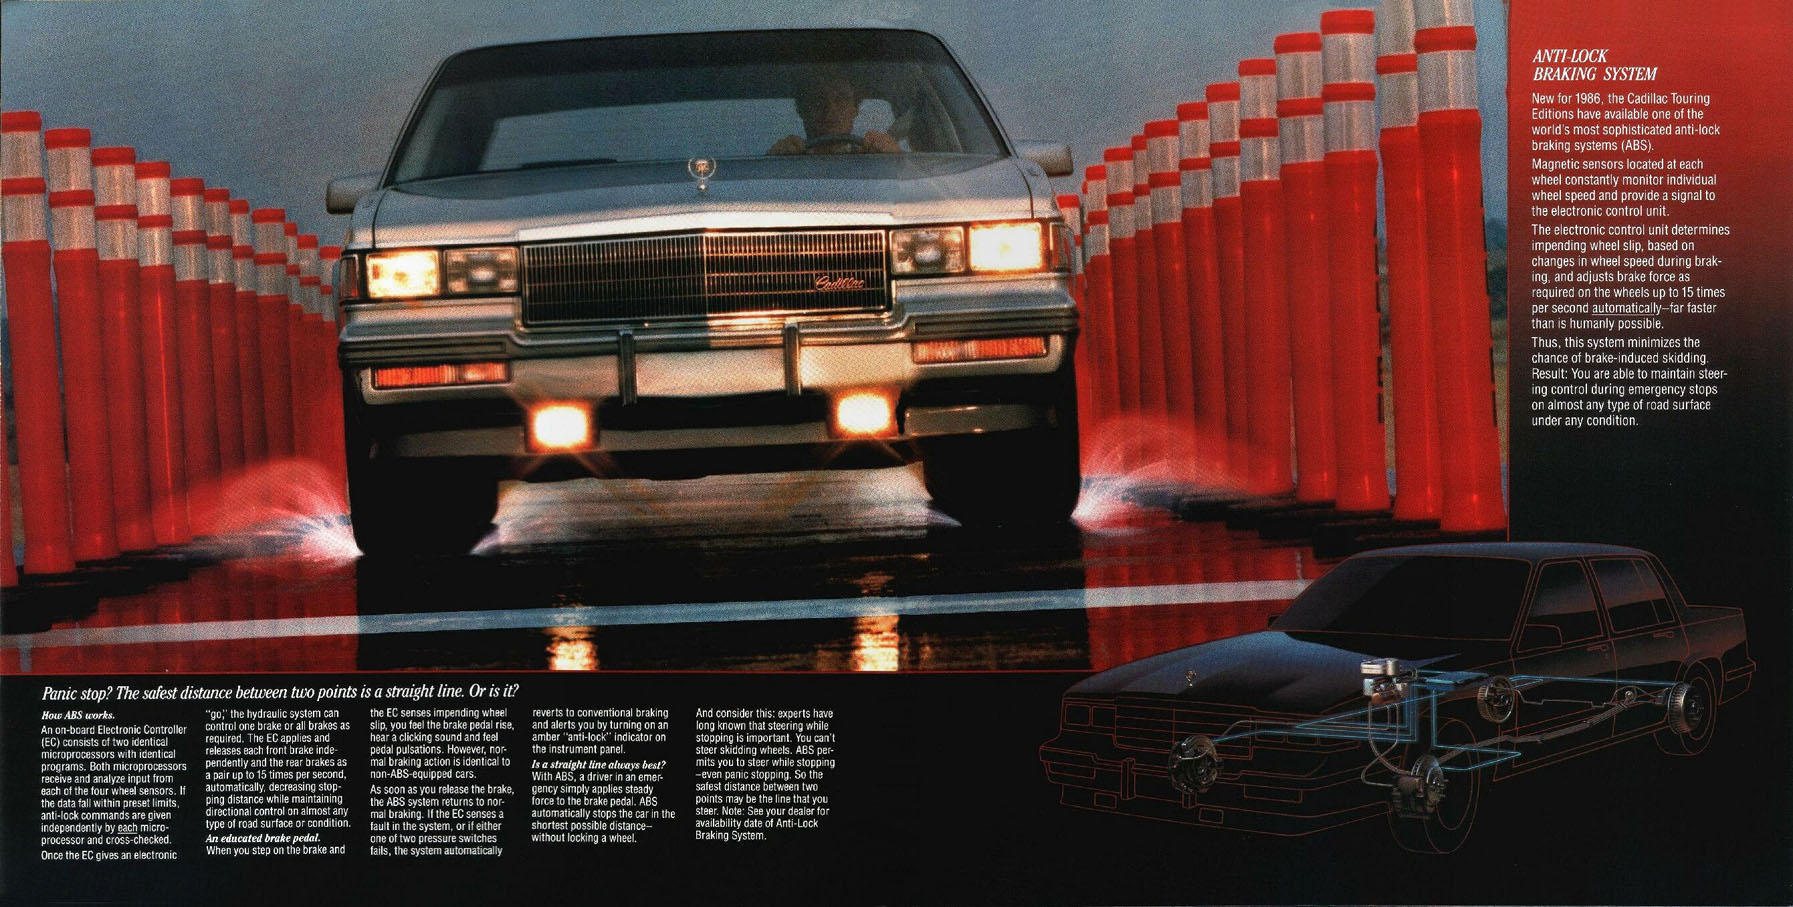 1986_Cadillac_Touring_Editrions-06-07